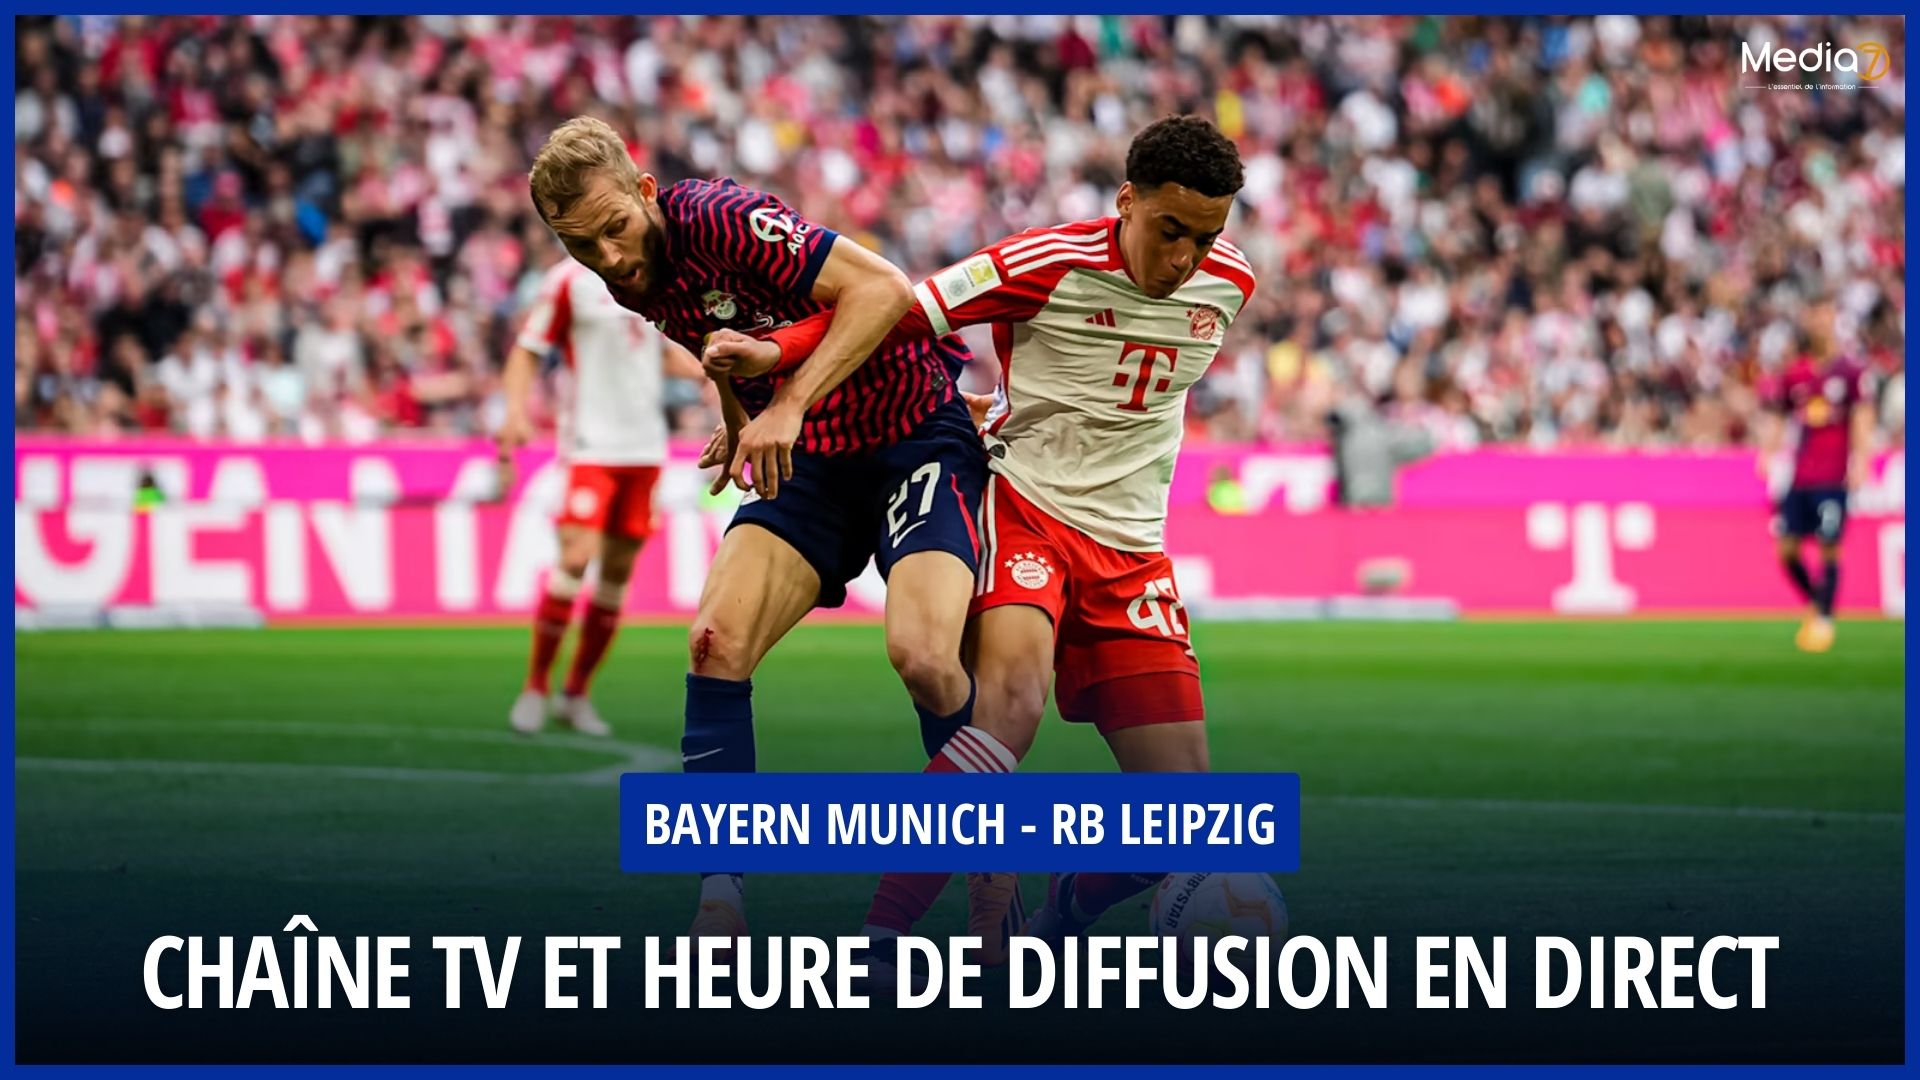 Bayern Munich - RB Leipzig match live: TV channel and broadcast time - Media7